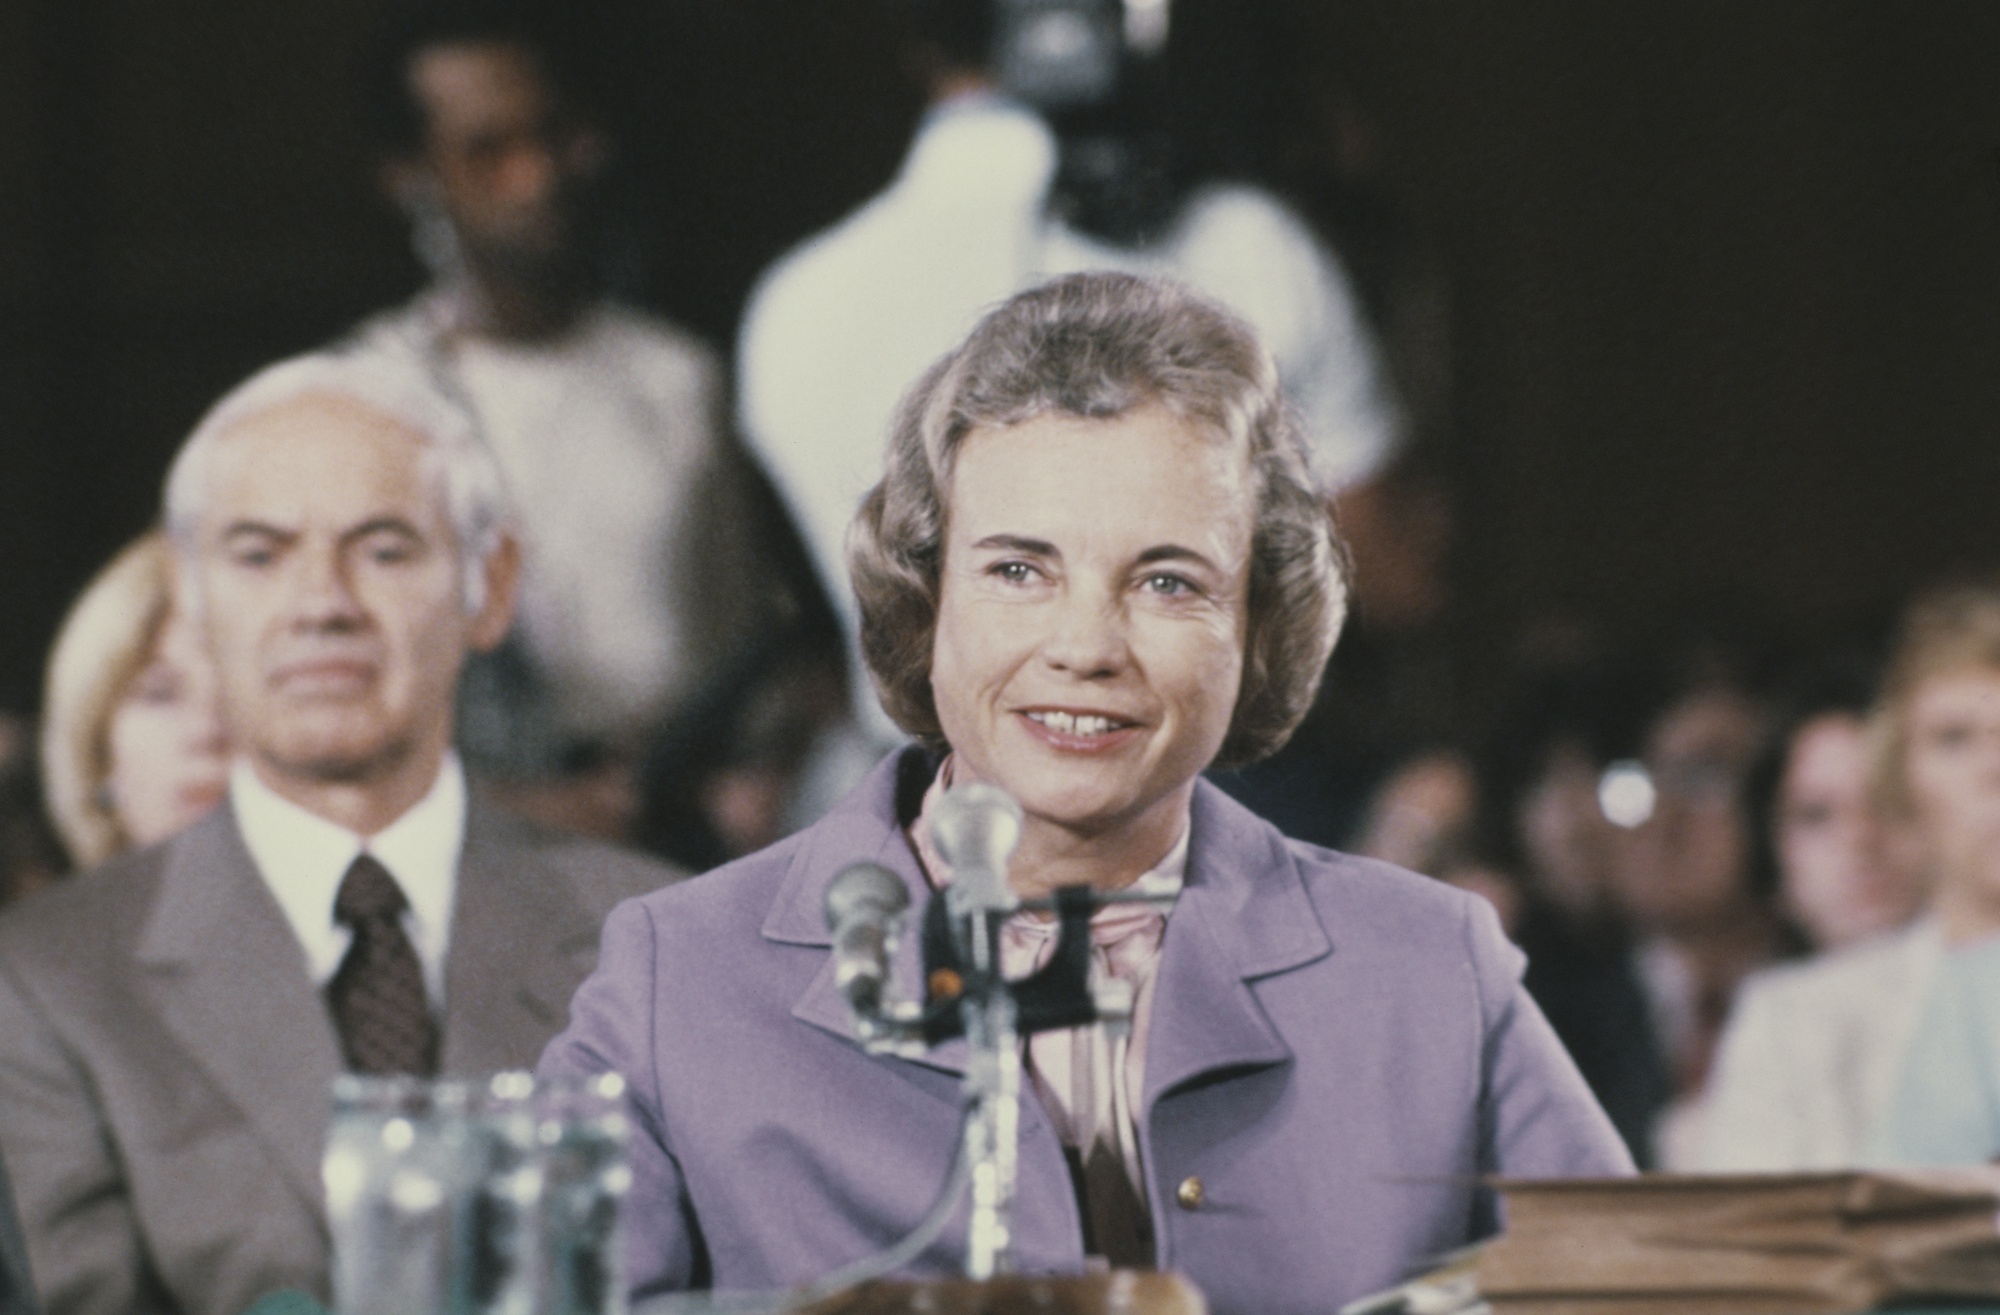 Sandra Day O’Connor broke the legal profession’s glass ceiling